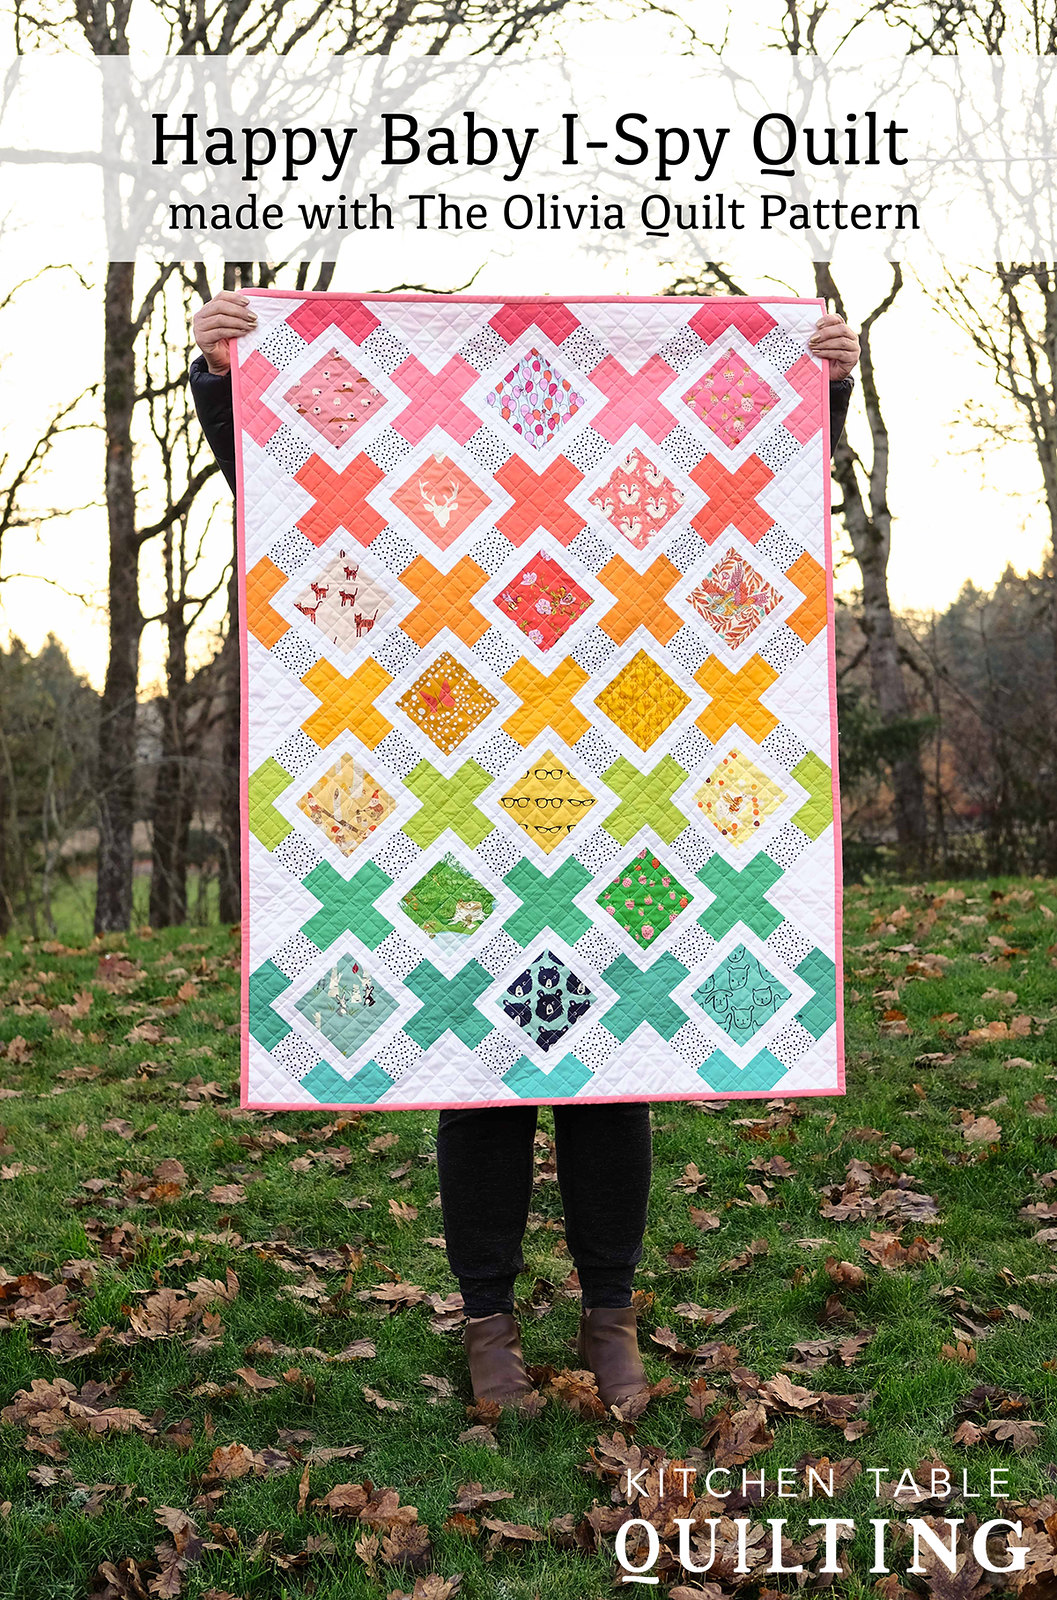 Happy Baby I-Spy Olivia Quilt - Kitchen Table Quilting